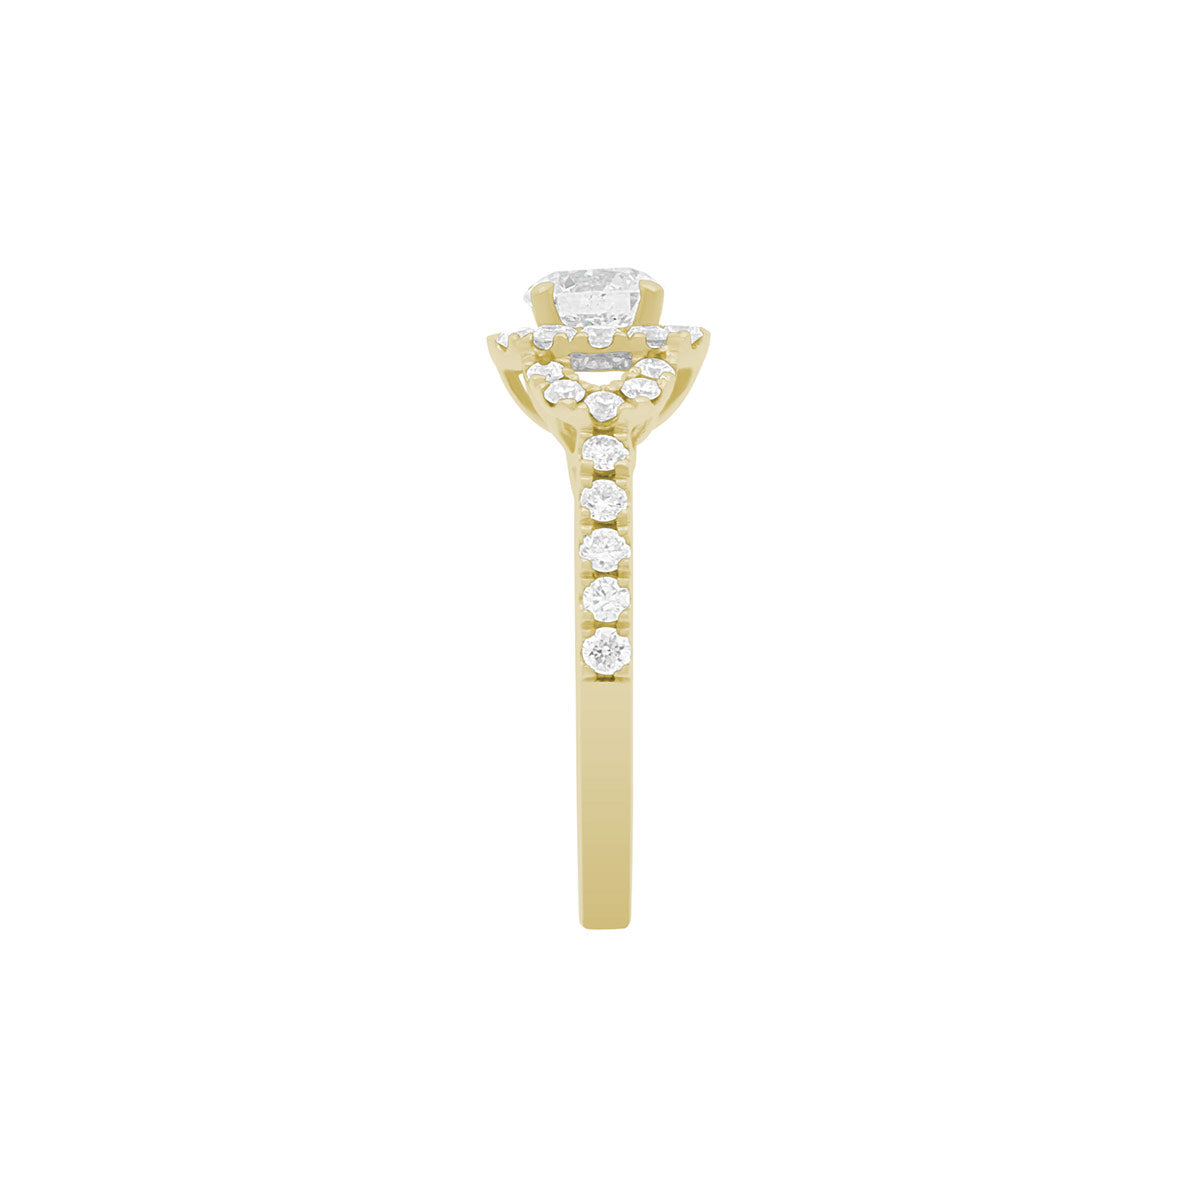 Triple Halo Engagement Ring  in yellow gold in side view upright position